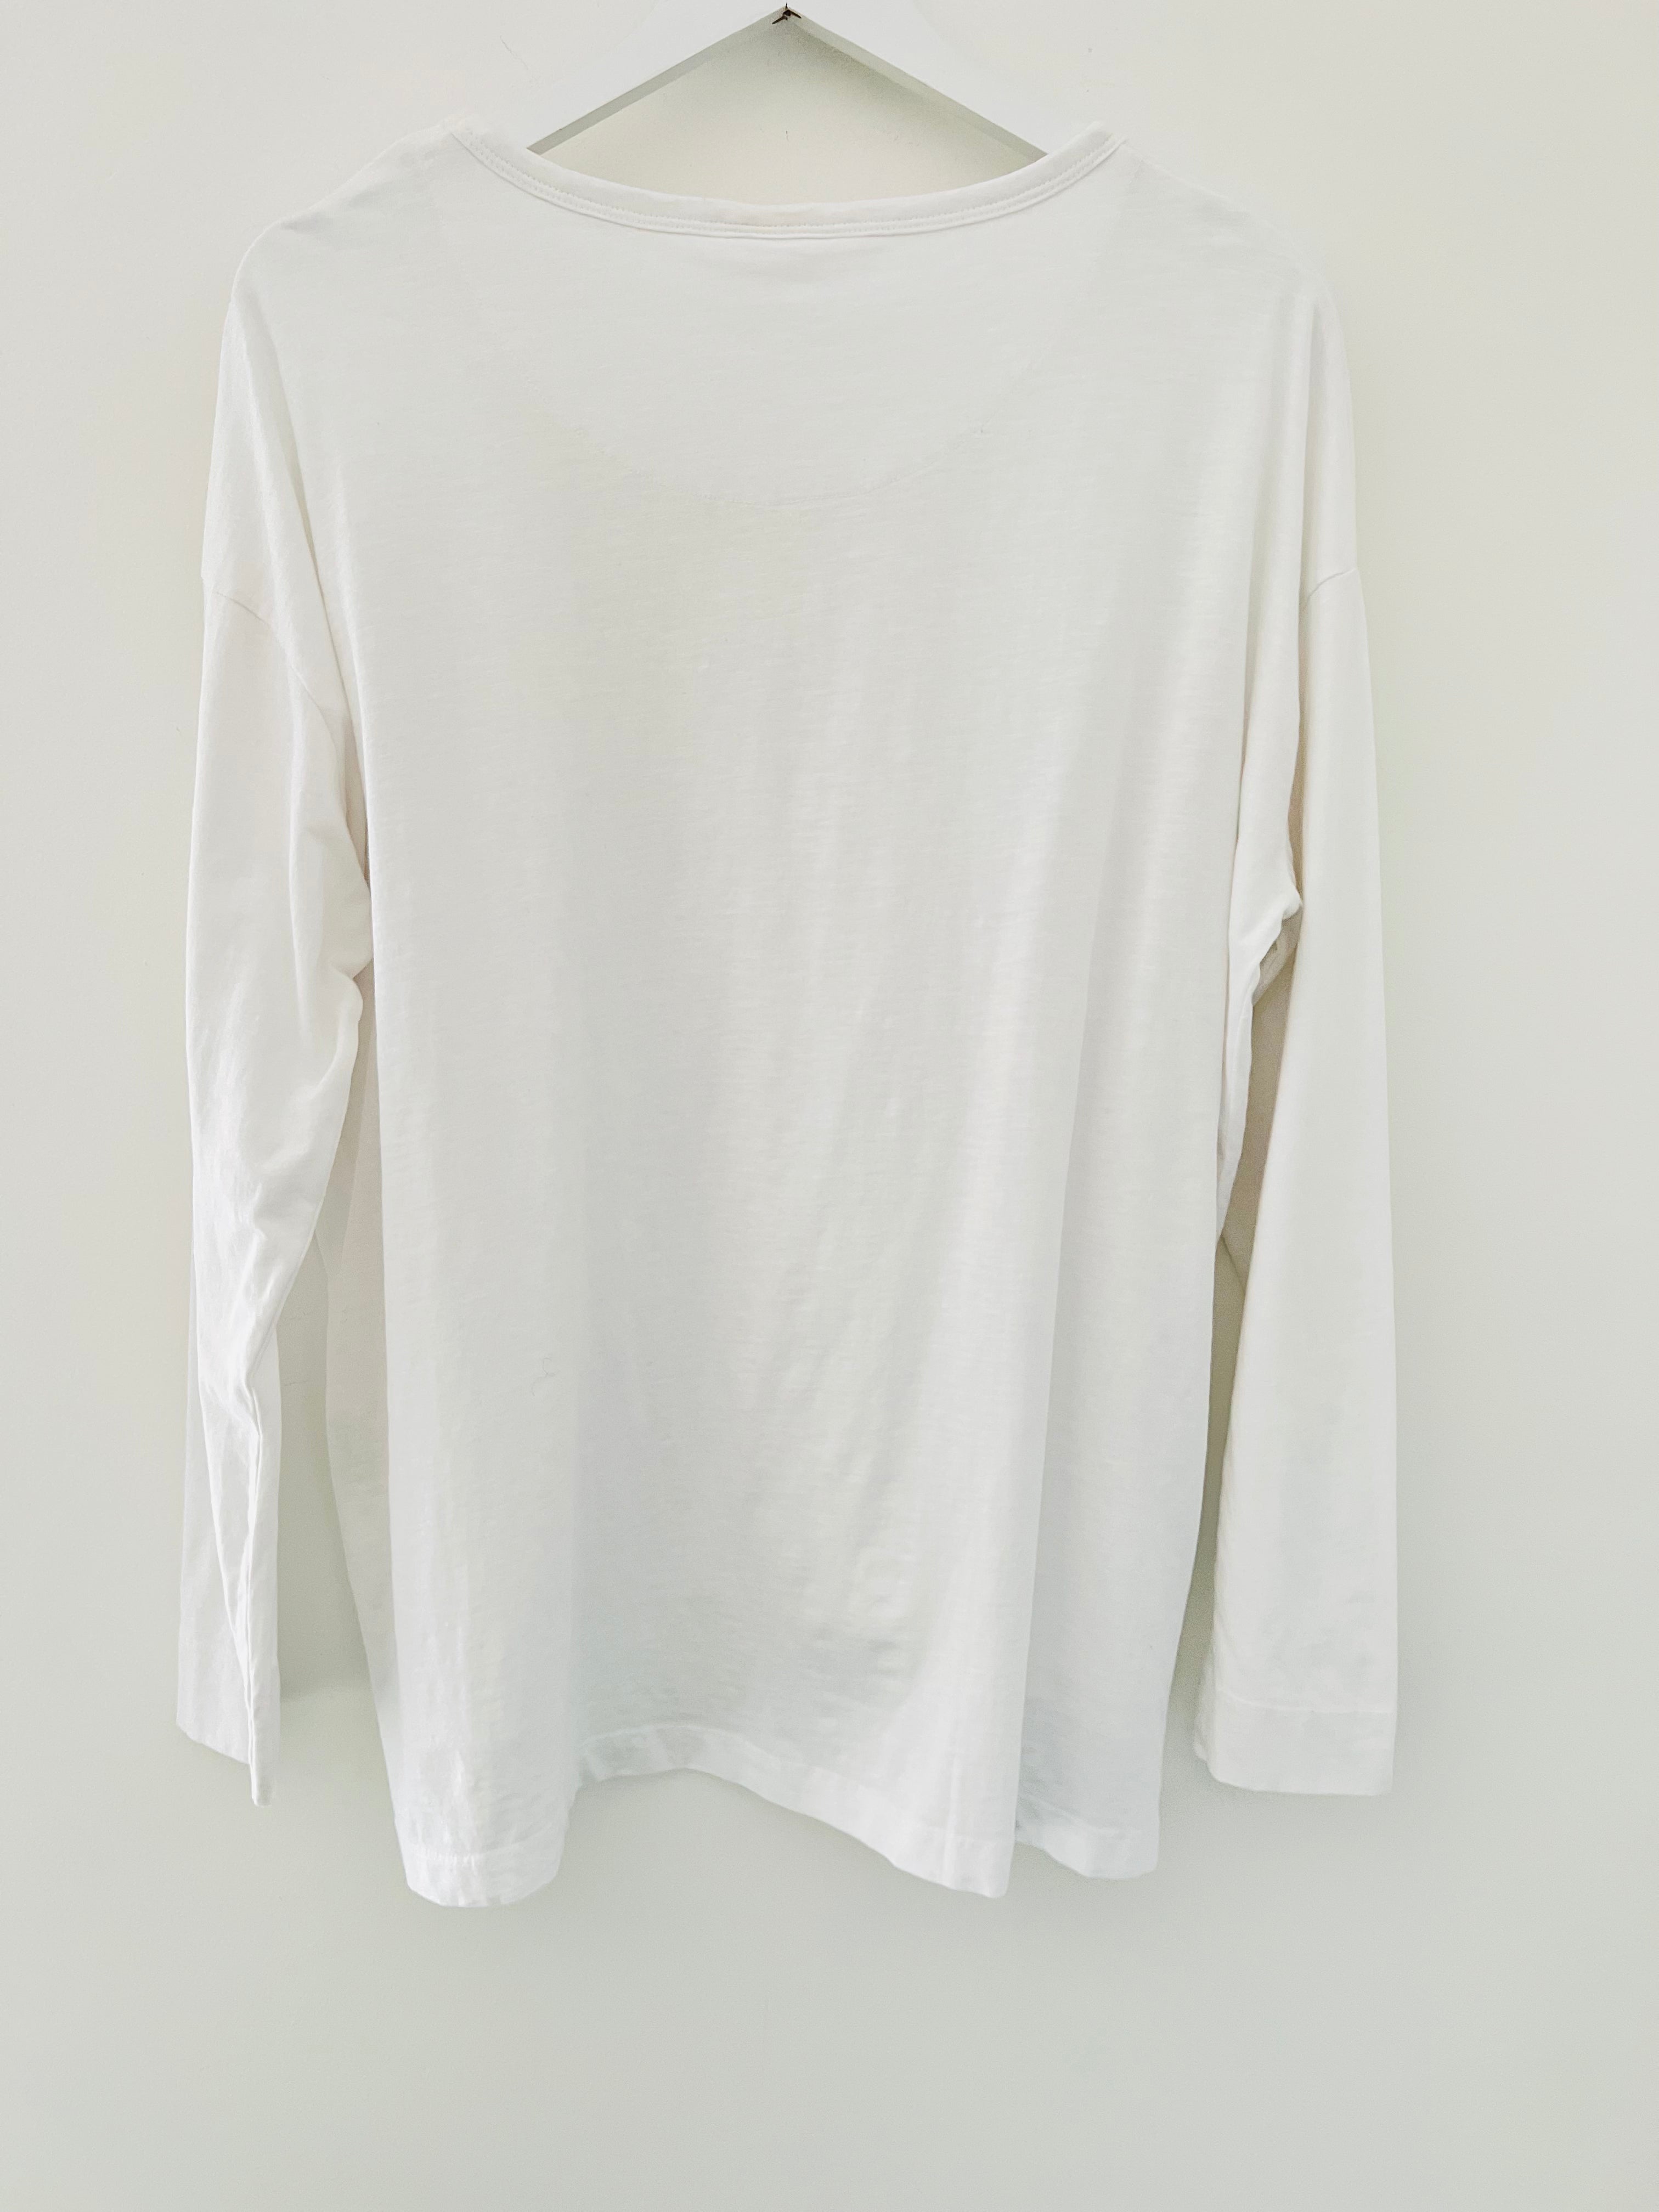 Long Sleeve Cotton Top in White